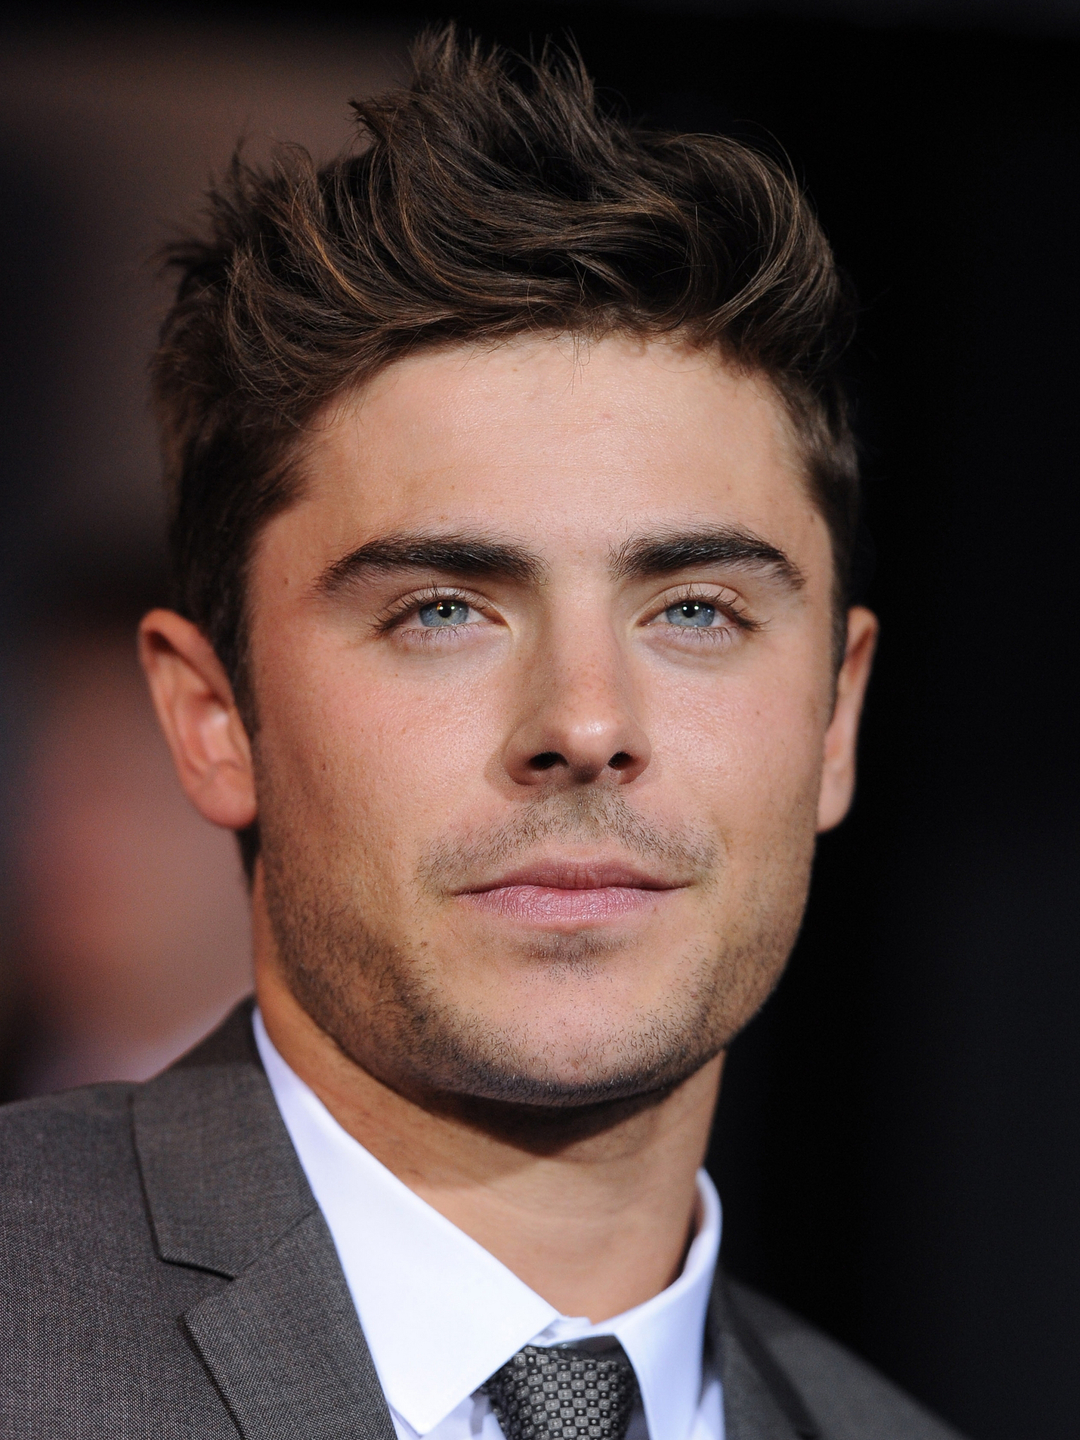 Zac Efron young age